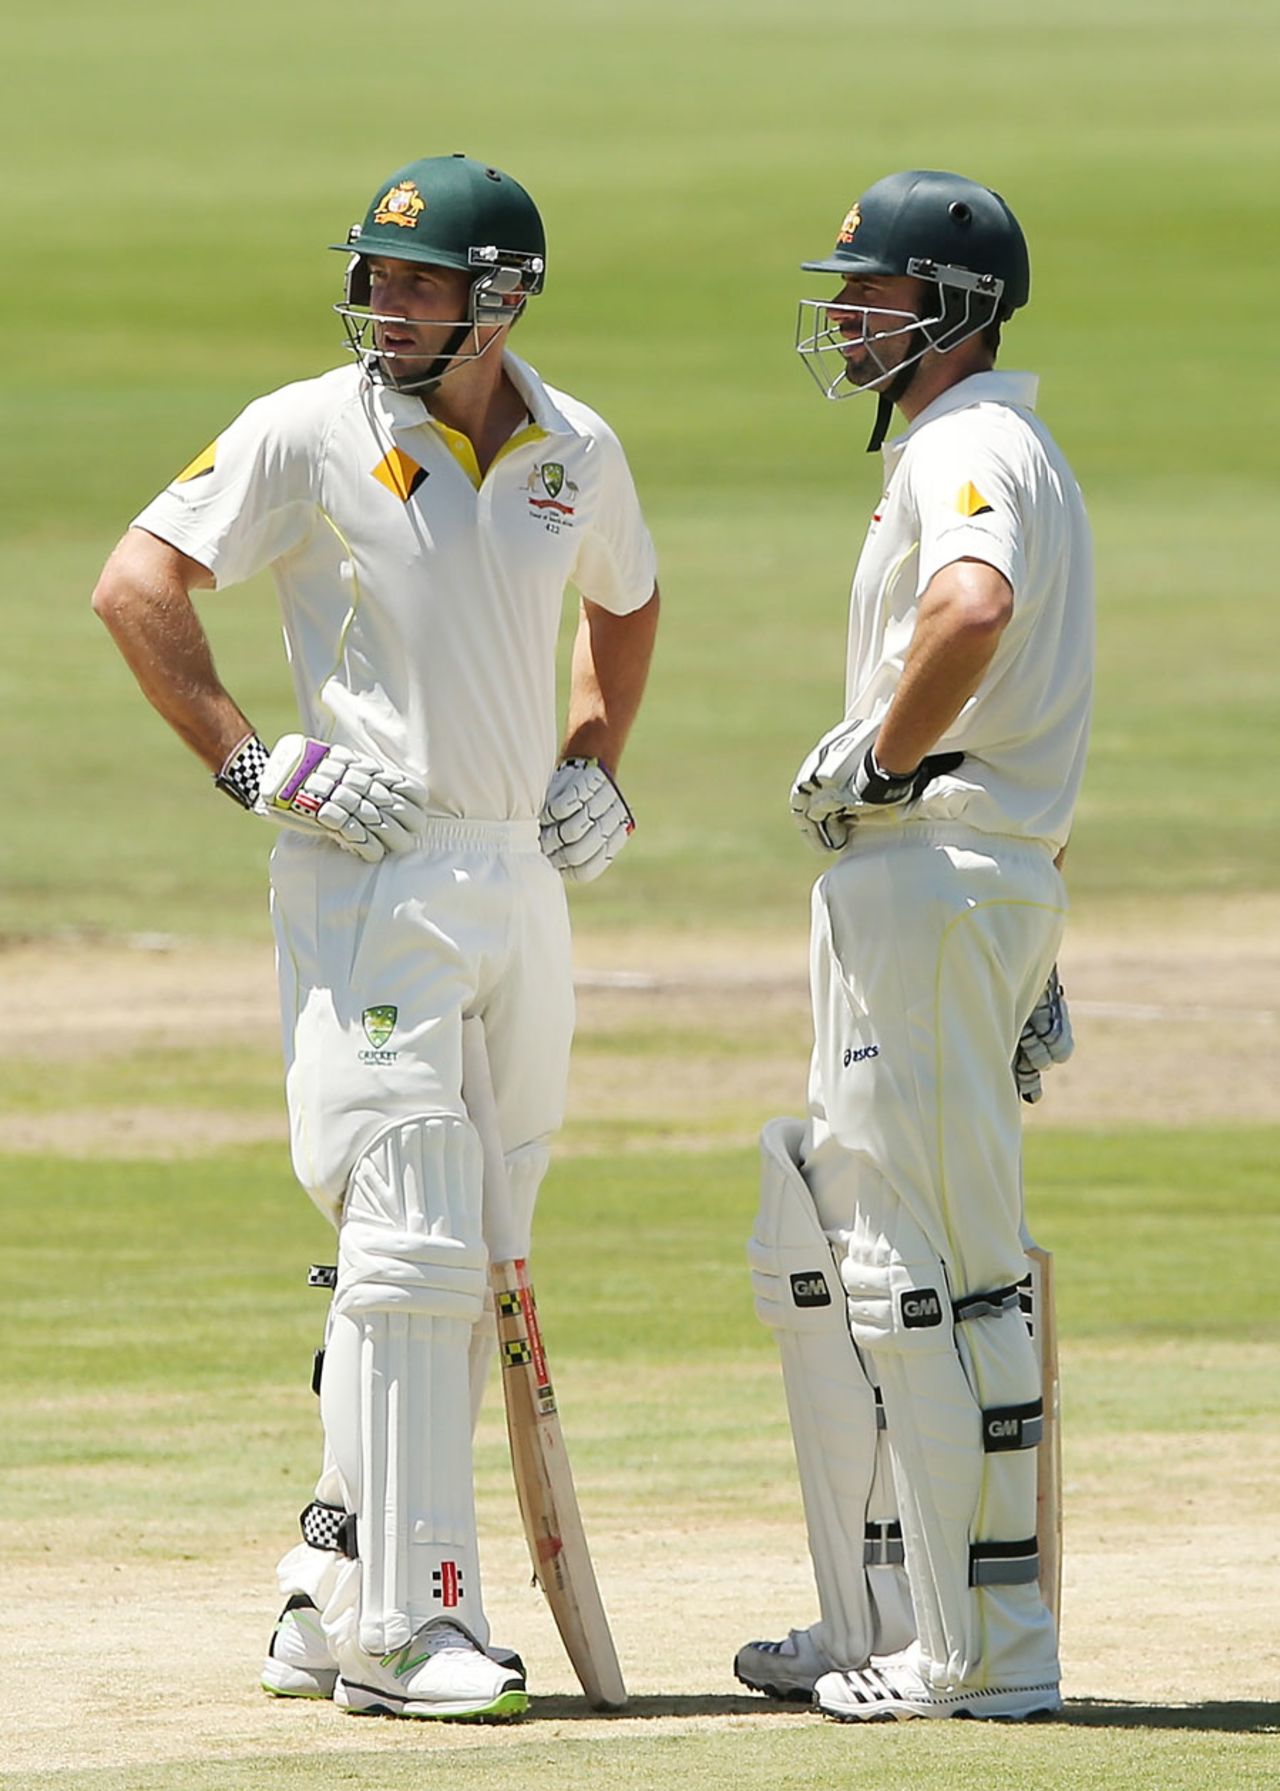 Shaun Marsh and Alex Doolan steadied Australia with a third-wicket stand, South Africa v Australia, 1st Test, Centurion, 1st day, February 12, 2014